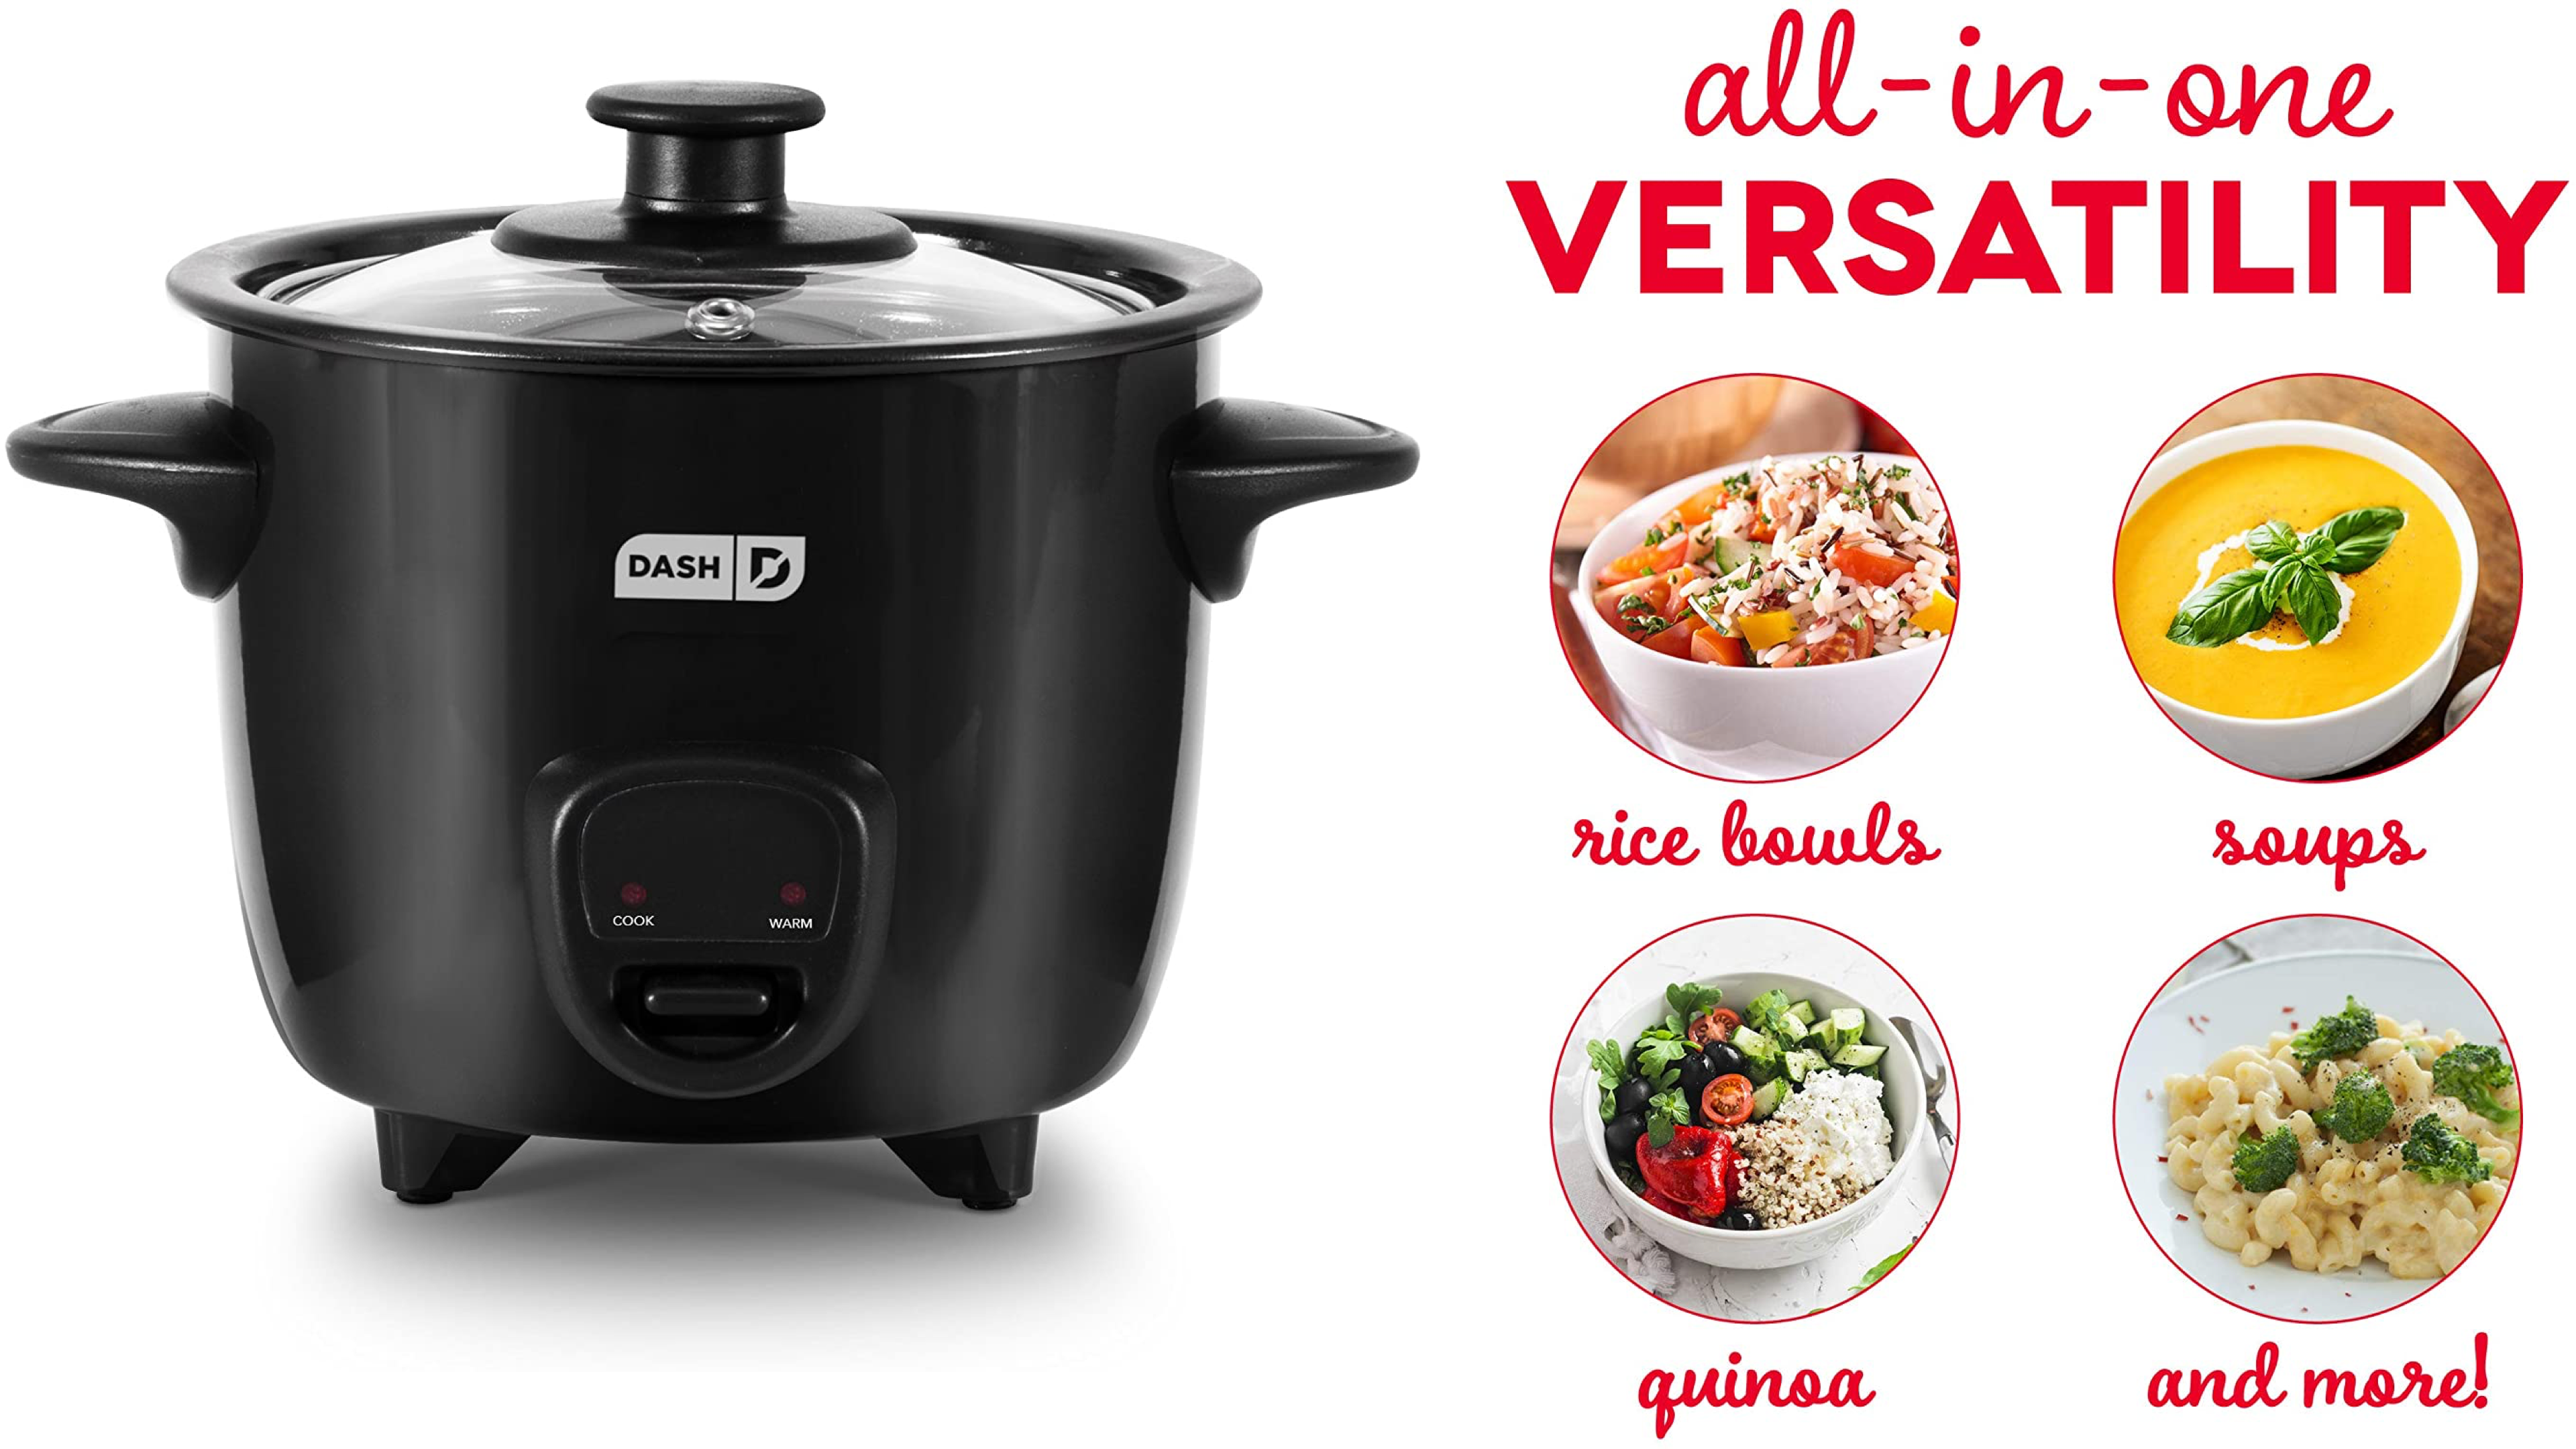 mini rice cooker that can also self-time quinoa, soups, and pasta